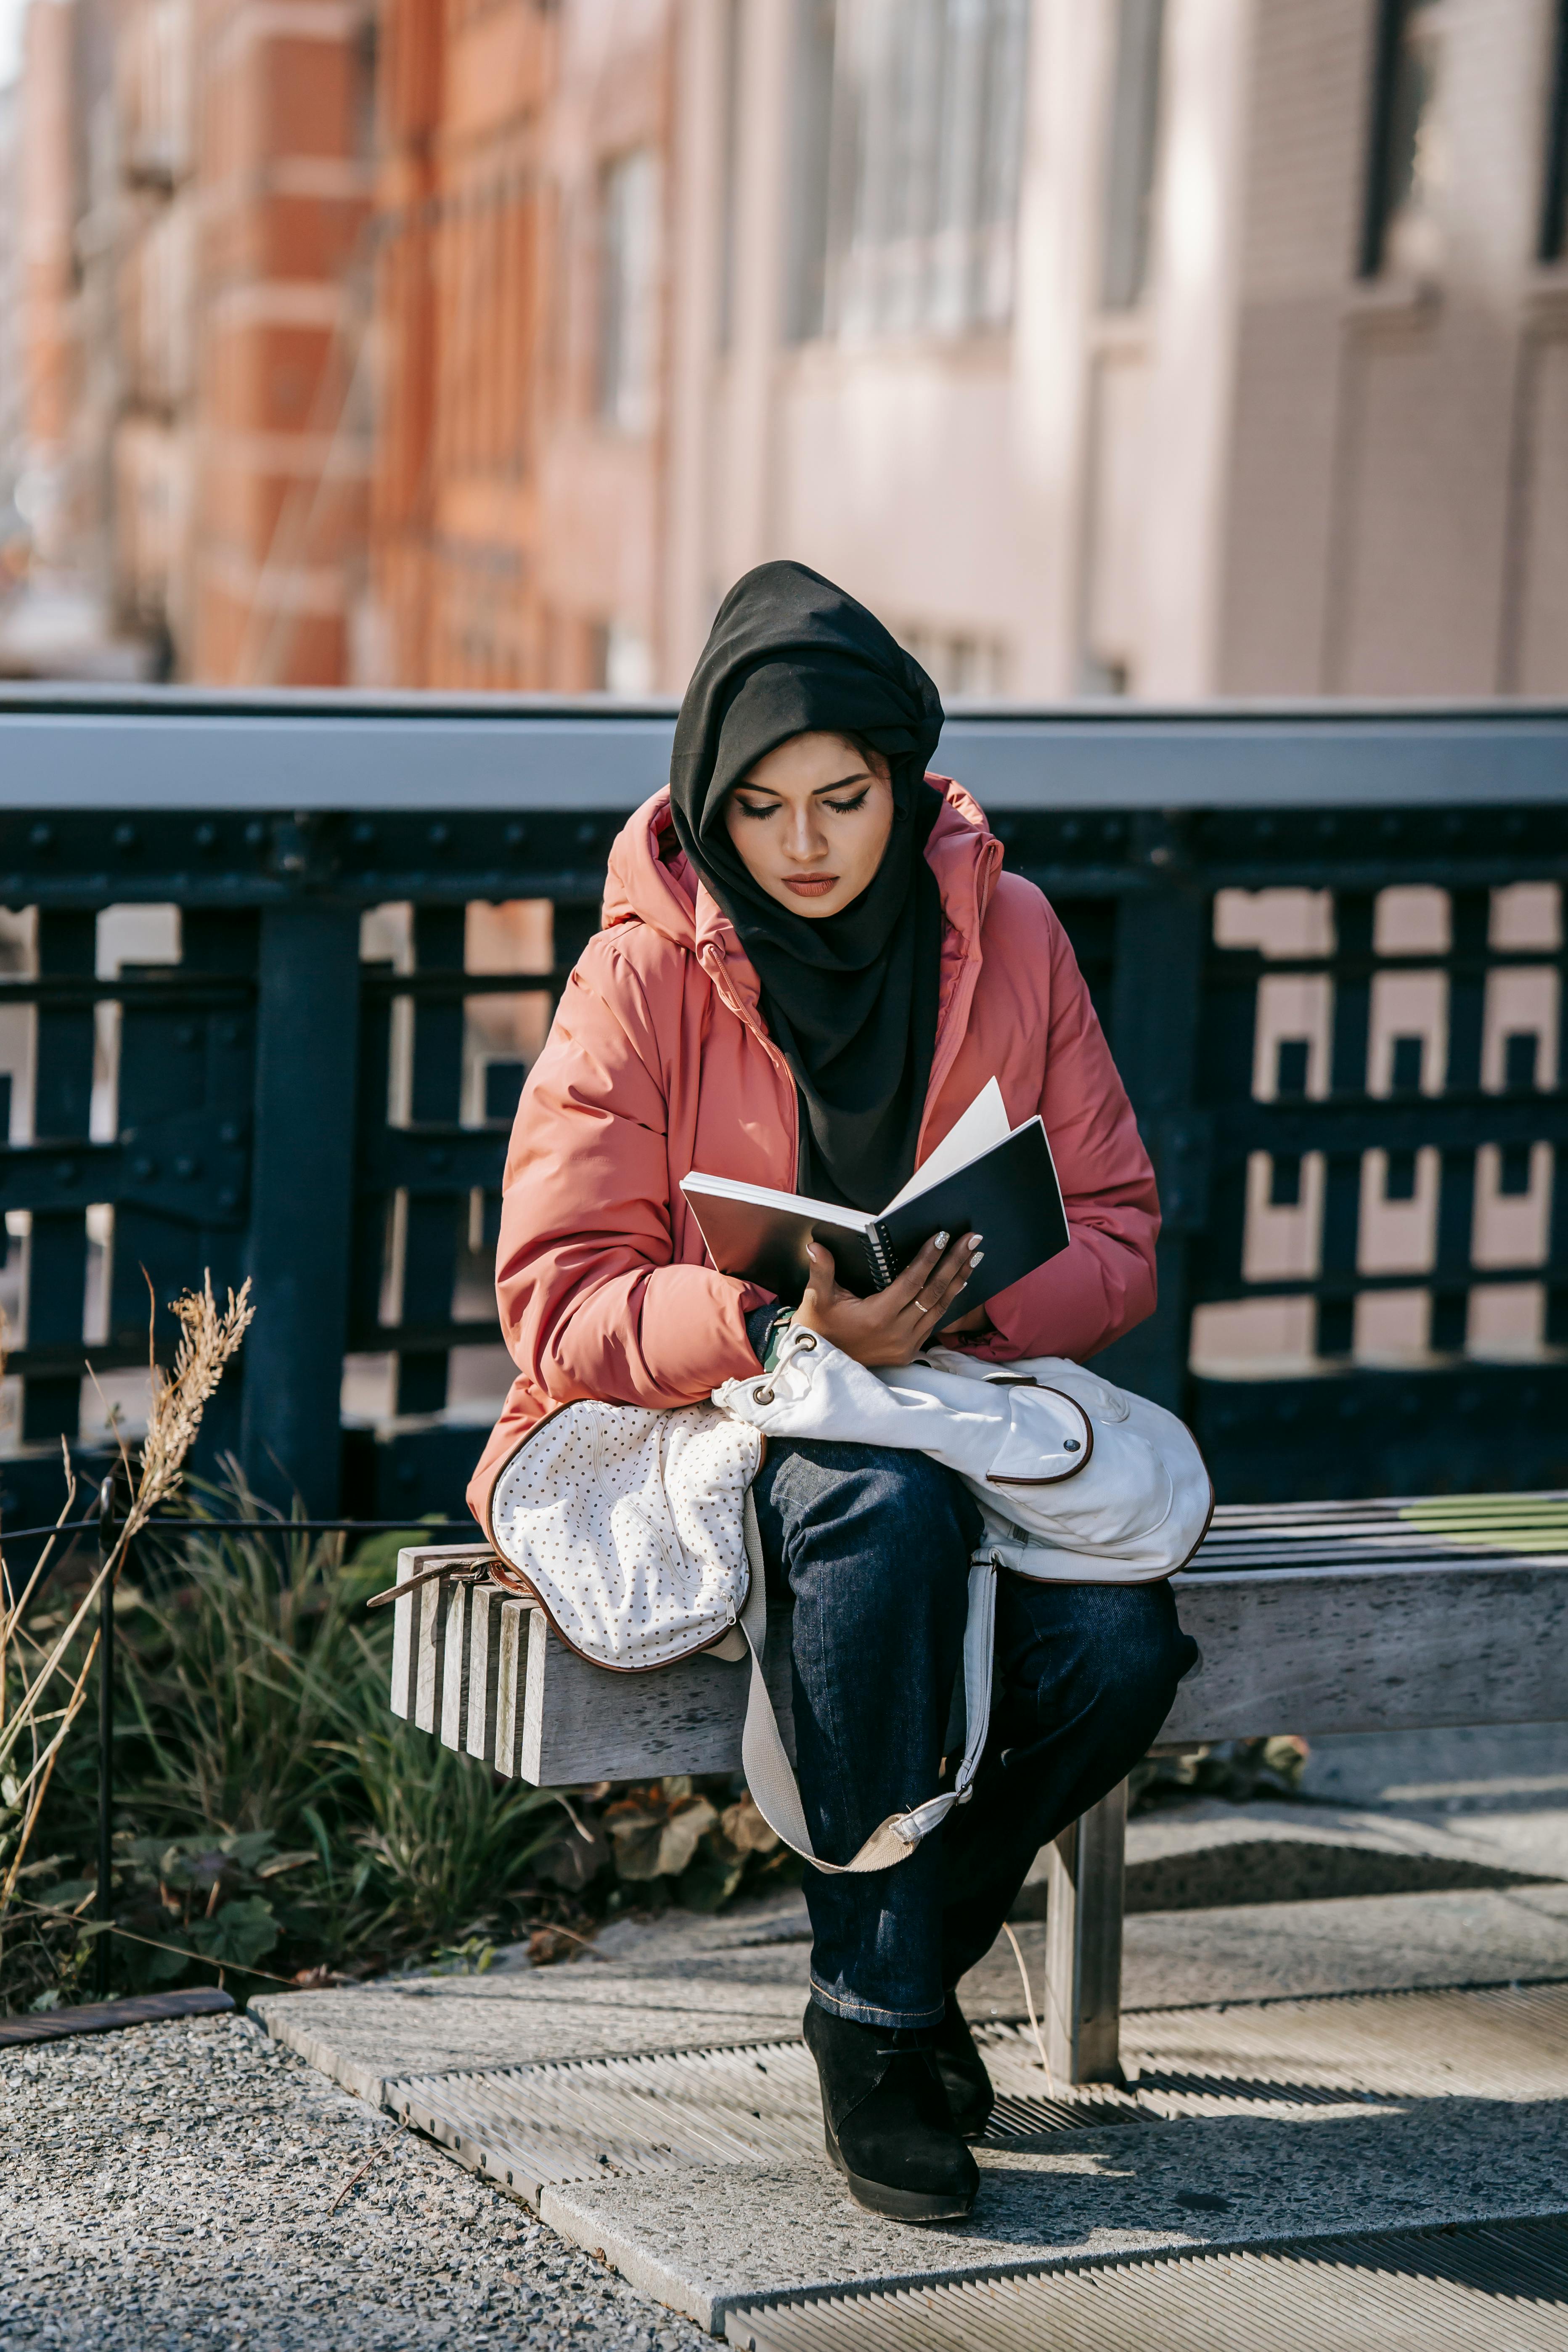 serious woman reading book while resting on bench